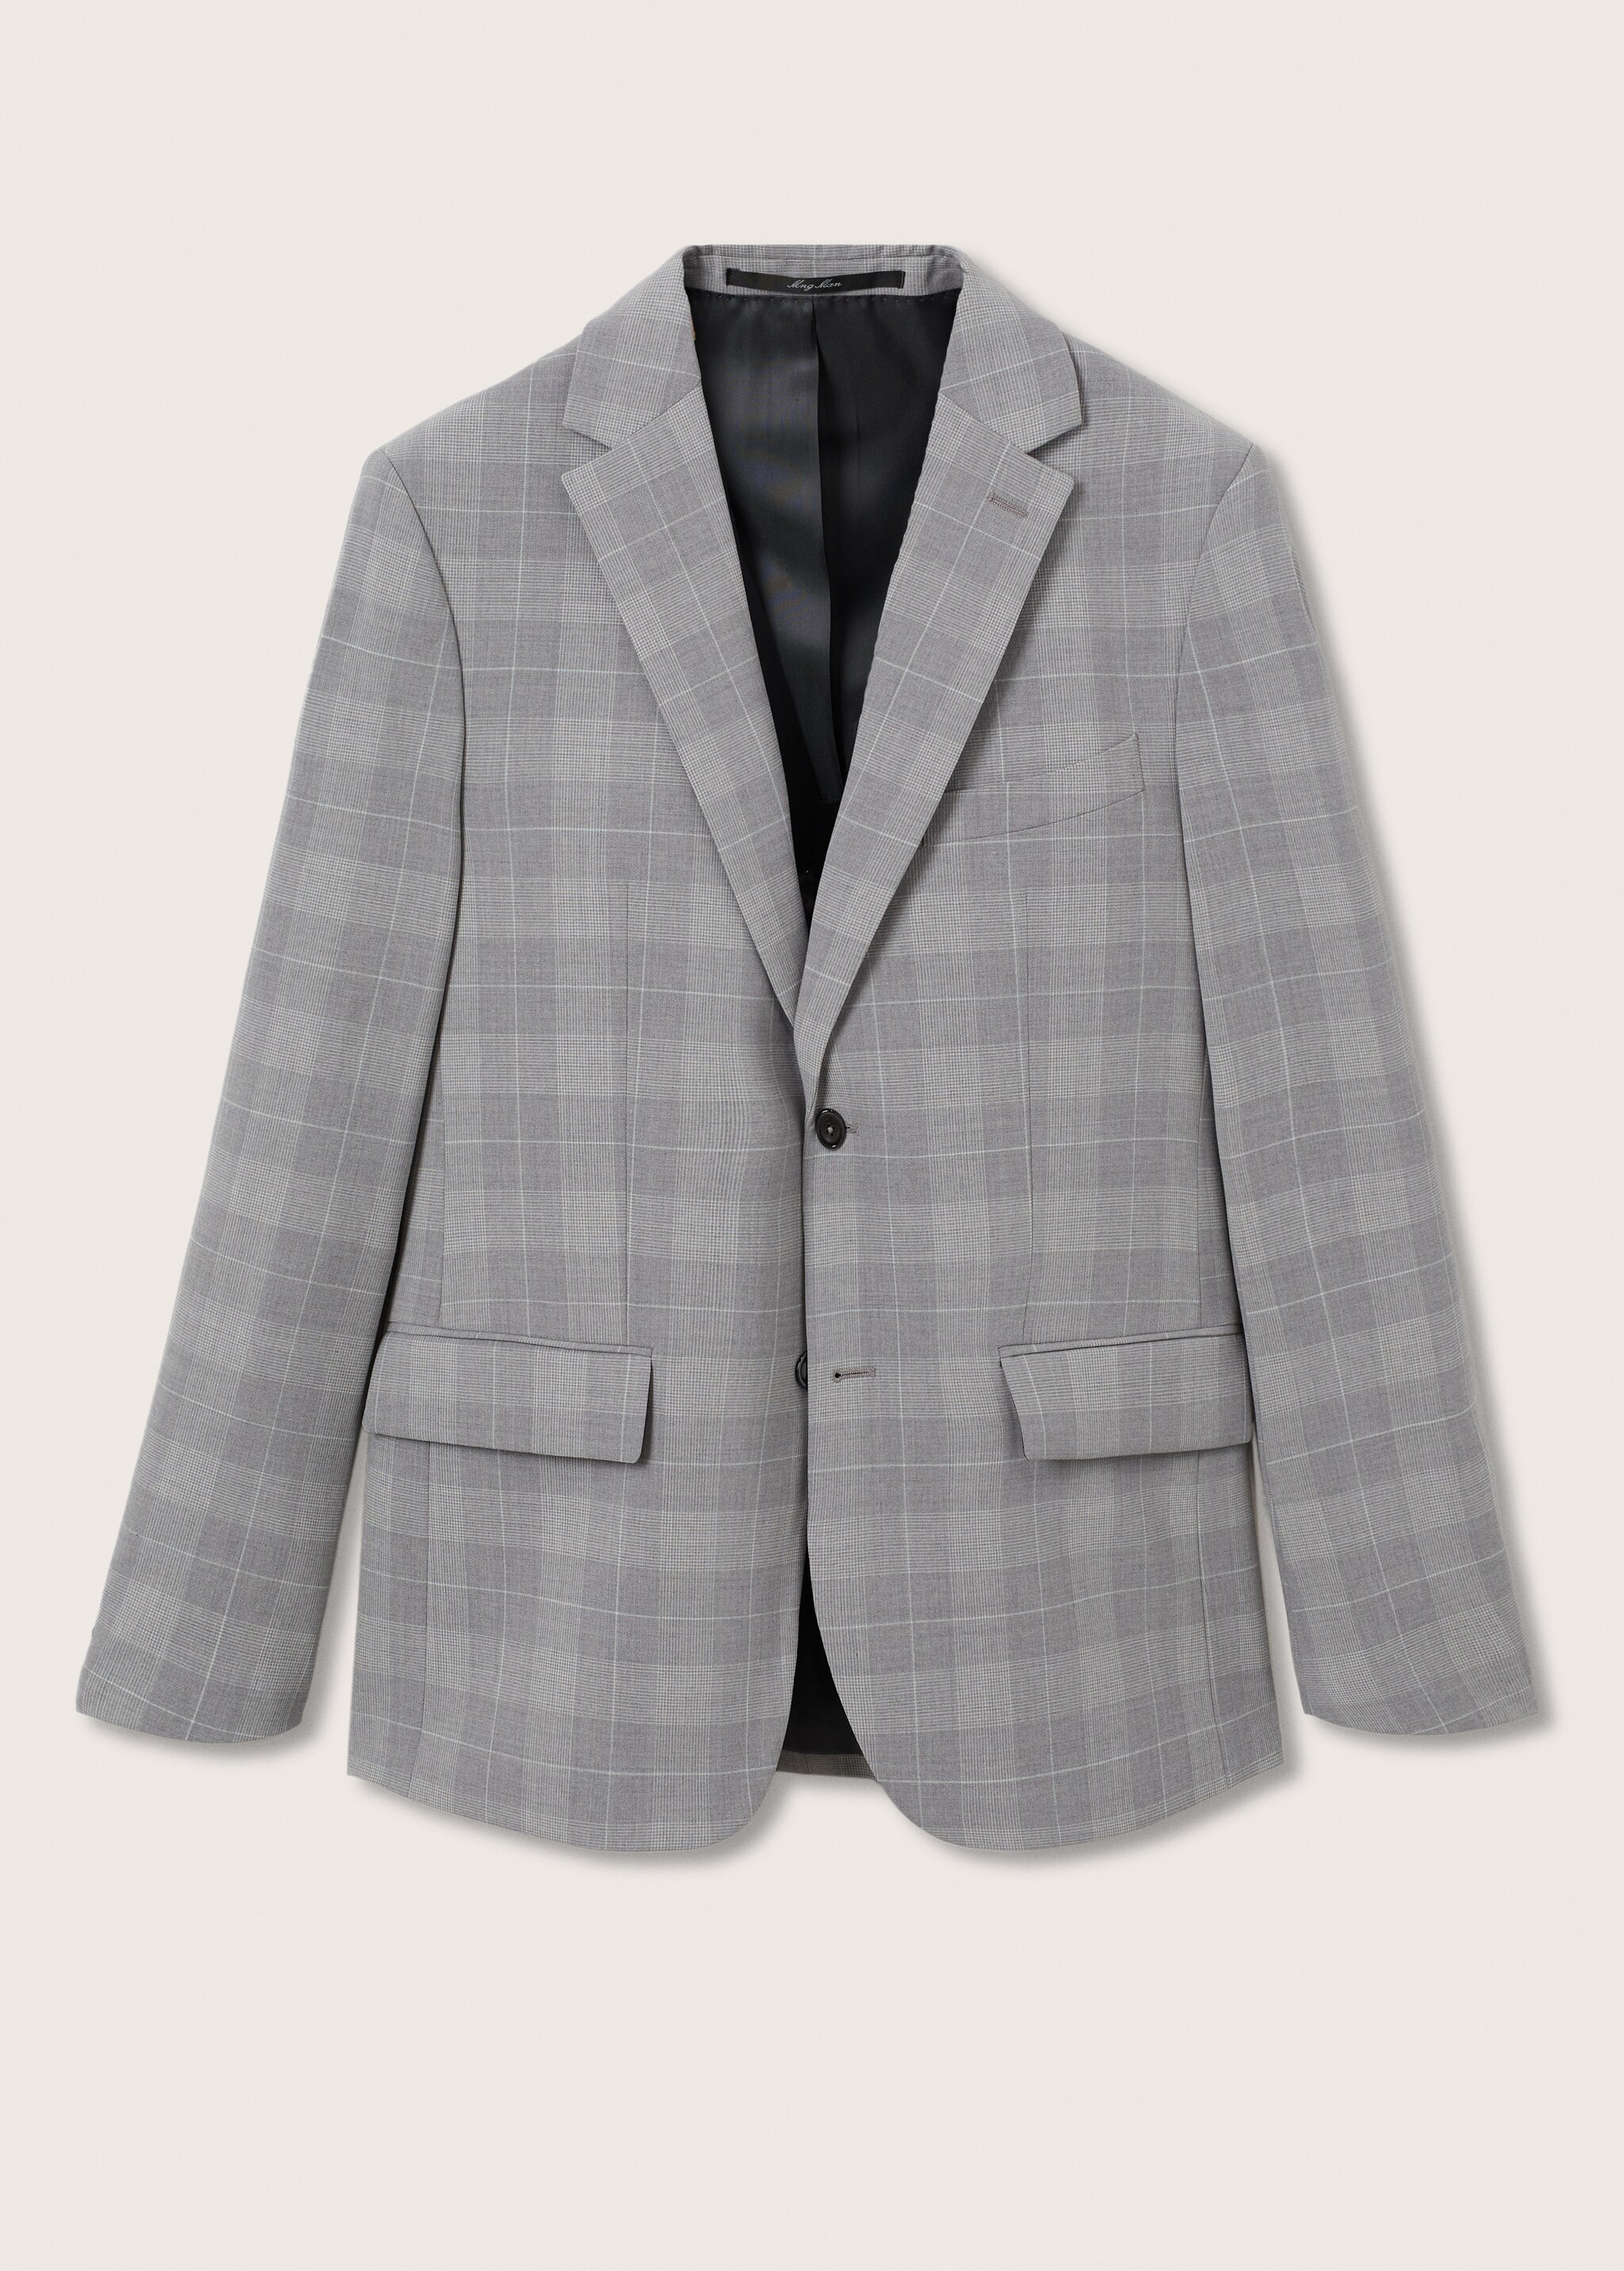 Slim fit check wool suit blazer - Article without model